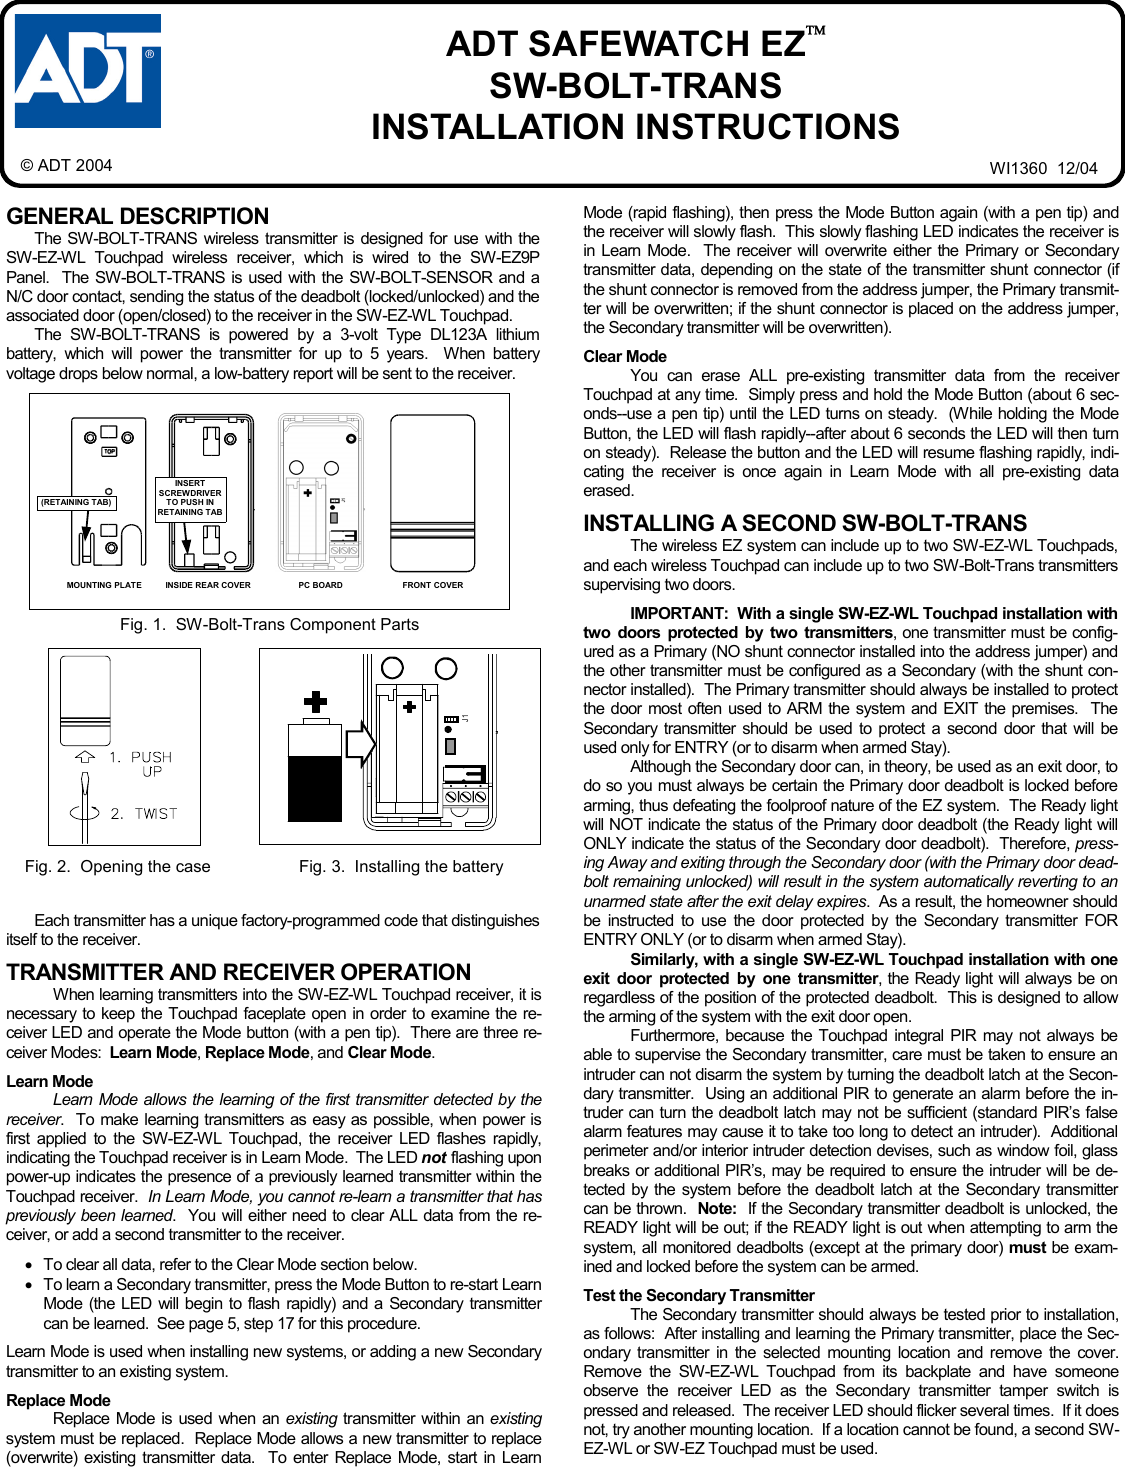 1 GENERAL DESCRIPTION The SW-BOLT-TRANS wireless transmitter is designed for use with the SW-EZ-WL Touchpad wireless receiver, which is wired to the SW-EZ9P Panel.  The SW-BOLT-TRANS is used with the SW-BOLT-SENSOR and a  N/C door contact, sending the status of the deadbolt (locked/unlocked) and the associated door (open/closed) to the receiver in the SW-EZ-WL Touchpad. The SW-BOLT-TRANS is powered by a 3-volt Type DL123A lithium battery, which will power the transmitter for up to 5 years.  When battery voltage drops below normal, a low-battery report will be sent to the receiver. Each transmitter has a unique factory-programmed code that distinguishes itself to the receiver.    TRANSMITTER AND RECEIVER OPERATION When learning transmitters into the SW-EZ-WL Touchpad receiver, it is necessary to keep the Touchpad faceplate open in order to examine the re-ceiver LED and operate the Mode button (with a pen tip).  There are three re-ceiver Modes:  Learn Mode, Replace Mode, and Clear Mode.    Learn Mode Learn Mode allows the learning of the first transmitter detected by the receiver.  To make learning transmitters as easy as possible, when power is first applied to the SW-EZ-WL Touchpad, the receiver LED flashes rapidly, indicating the Touchpad receiver is in Learn Mode.  The LED not flashing upon power-up indicates the presence of a previously learned transmitter within the Touchpad receiver.  In Learn Mode, you cannot re-learn a transmitter that has previously been learned.  You will either need to clear ALL data from the re-ceiver, or add a second transmitter to the receiver.  •To clear all data, refer to the Clear Mode section below.   •To learn a Secondary transmitter, press the Mode Button to re-start Learn Mode (the LED will begin to flash rapidly) and a Secondary transmitter can be learned.  See page 5, step 17 for this procedure.    Learn Mode is used when installing new systems, or adding a new Secondary transmitter to an existing system.  Replace Mode Replace Mode is used when an existing  transmitter within an existing system must be replaced.  Replace Mode allows a new transmitter to replace (overwrite) existing transmitter data.  To enter Replace Mode, start in Learn Mode (rapid flashing), then press the Mode Button again (with a pen tip) and the receiver will slowly flash.  This slowly flashing LED indicates the receiver is in Learn Mode.  The receiver will overwrite either the Primary or Secondary transmitter data, depending on the state of the transmitter shunt connector (if the shunt connector is removed from the address jumper, the Primary transmit-ter will be overwritten; if the shunt connector is placed on the address jumper, the Secondary transmitter will be overwritten).  Clear Mode You can erase ALL pre-existing transmitter data from the receiver Touchpad at any time.  Simply press and hold the Mode Button (about 6 sec-onds--use a pen tip) until the LED turns on steady.  (While holding the Mode Button, the LED will flash rapidly--after about 6 seconds the LED will then turn on steady).  Release the button and the LED will resume flashing rapidly, indi-cating the receiver is once again in Learn Mode with all pre-existing data erased.  INSTALLING A SECOND SW-BOLT-TRANS The wireless EZ system can include up to two SW-EZ-WL Touchpads, and each wireless Touchpad can include up to two SW-Bolt-Trans transmitters supervising two doors.   IMPORTANT:  With a single SW-EZ-WL Touchpad installation with two doors protected by two transmitters, one transmitter must be config-ured as a Primary (NO shunt connector installed into the address jumper) and the other transmitter must be configured as a Secondary (with the shunt con-nector installed).  The Primary transmitter should always be installed to protect the door most often used to ARM the system and EXIT the premises.  The Secondary transmitter should be used to protect a second door that will be used only for ENTRY (or to disarm when armed Stay).   Although the Secondary door can, in theory, be used as an exit door, to do so you must always be certain the Primary door deadbolt is locked before arming, thus defeating the foolproof nature of the EZ system.  The Ready light will NOT indicate the status of the Primary door deadbolt (the Ready light will ONLY indicate the status of the Secondary door deadbolt).  Therefore, press-ing Away and exiting through the Secondary door (with the Primary door dead-bolt remaining unlocked) will result in the system automatically reverting to an unarmed state after the exit delay expires.  As a result, the homeowner should be instructed to use the door protected by the Secondary transmitter FOR ENTRY ONLY (or to disarm when armed Stay). Similarly, with a single SW-EZ-WL Touchpad installation with one exit door protected by one transmitter, the Ready light will always be on regardless of the position of the protected deadbolt.  This is designed to allow the arming of the system with the exit door open. Furthermore, because the Touchpad integral PIR may not always be able to supervise the Secondary transmitter, care must be taken to ensure an intruder can not disarm the system by turning the deadbolt latch at the Secon-dary transmitter.  Using an additional PIR to generate an alarm before the in-truder can turn the deadbolt latch may not be sufficient (standard PIR’s false alarm features may cause it to take too long to detect an intruder).  Additional perimeter and/or interior intruder detection devises, such as window foil, glass breaks or additional PIR’s, may be required to ensure the intruder will be de-tected by the system before the deadbolt latch at the Secondary transmitter can be thrown.  Note:  If the Secondary transmitter deadbolt is unlocked, the READY light will be out; if the READY light is out when attempting to arm the system, all monitored deadbolts (except at the primary door) must be exam-ined and locked before the system can be armed.  Test the Secondary Transmitter The Secondary transmitter should always be tested prior to installation, as follows:  After installing and learning the Primary transmitter, place the Sec-ondary transmitter in the selected mounting location and remove the cover.  Remove the SW-EZ-WL Touchpad from its backplate and have someone observe the receiver LED as the Secondary transmitter tamper switch is pressed and released.  The receiver LED should flicker several times.  If it does not, try another mounting location.  If a location cannot be found, a second SW-EZ-WL or SW-EZ Touchpad must be used.    Fig. 1.  SW-Bolt-Trans Component Parts  ADT SAFEWATCH EZ SW-BOLT-TRANS  INSTALLATION INSTRUCTIONS WI1360  12/04 © ADT 2004 FRONT COVER PC BOARD INSIDE REAR COVER MOUNTING PLATE (RETAINING TAB) INSERT SCREWDRIVER TO PUSH IN RETAINING TAB  Fig. 2.  Opening the case  Fig. 3.  Installing the battery    J1     